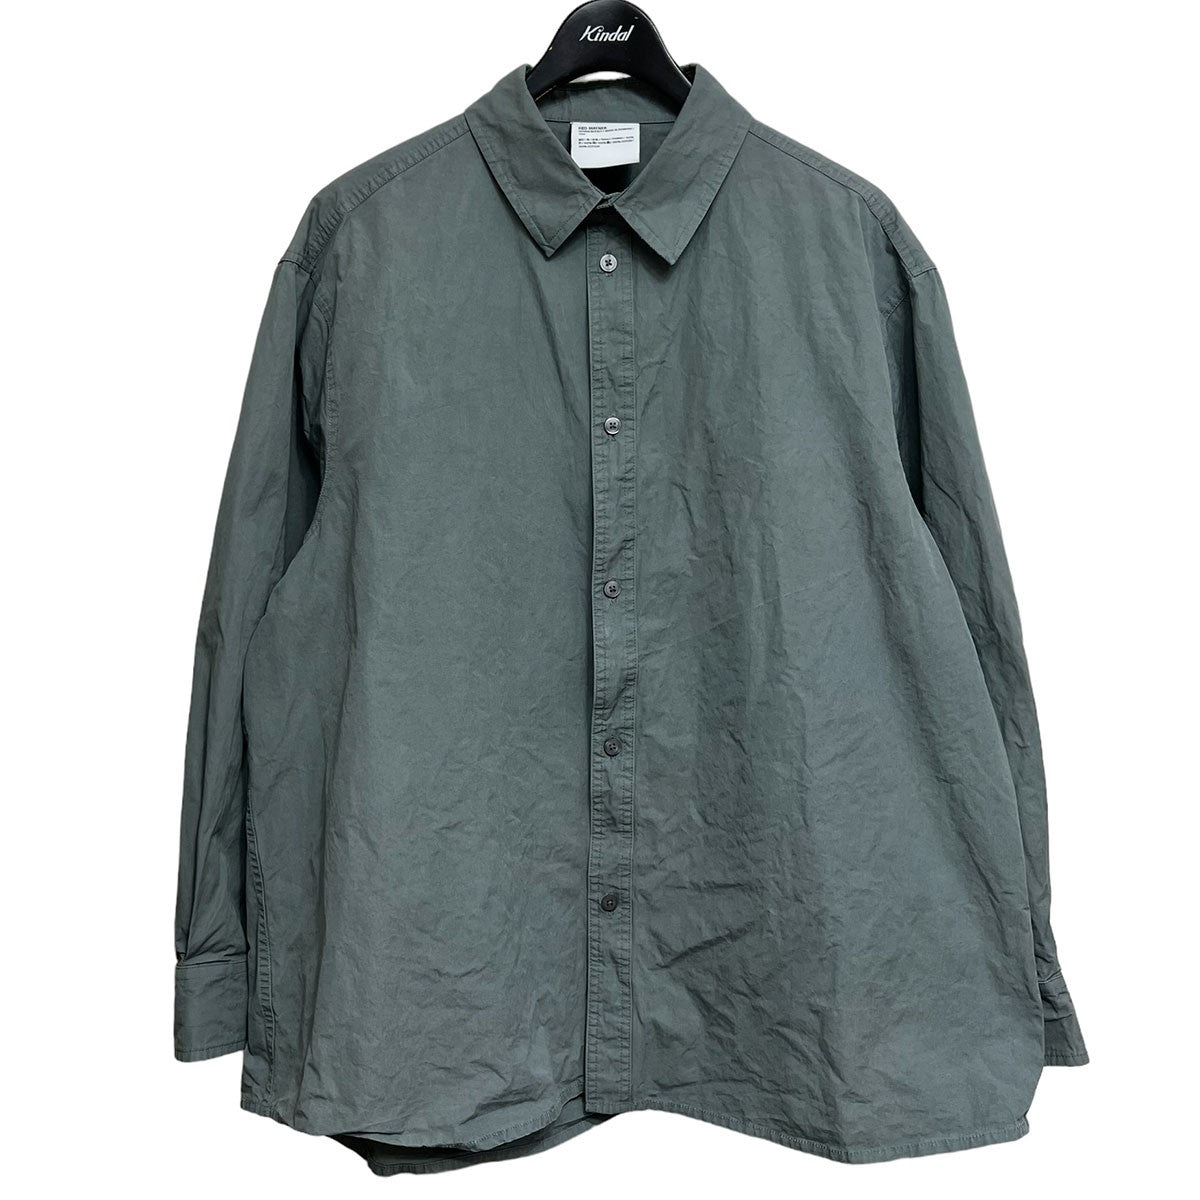 HED MAYNER 22aw pleated shirt ストライプシャツ素材